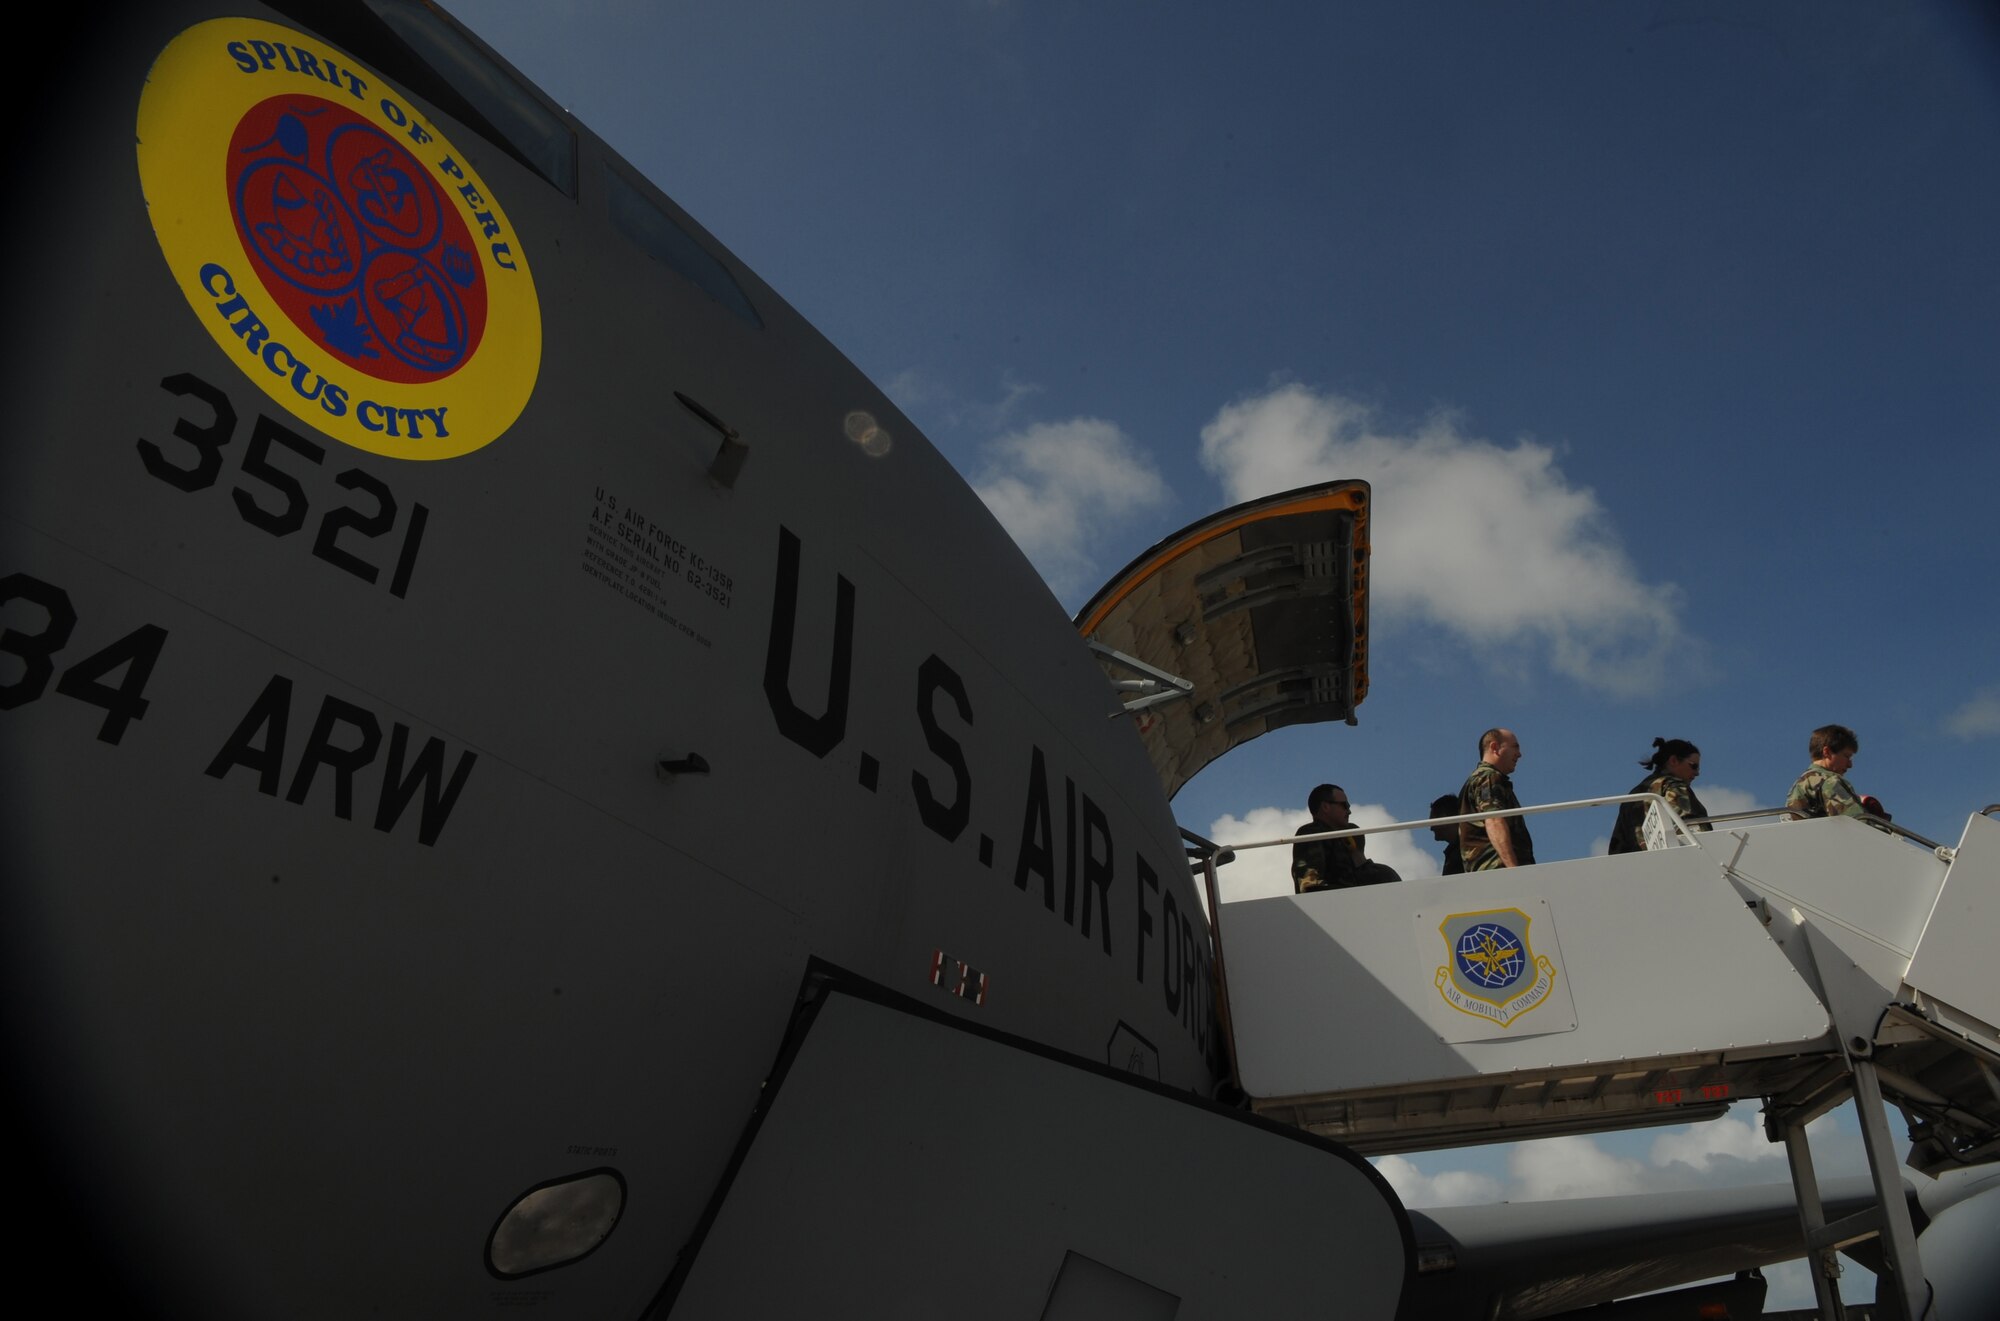 Personnel from the 434th Air Refueling Wing, Grissom Air Reserve Base, Ind. off load from a KC-135R Stratotanker Dec. 31 at Andersen Air Force Base, Guam. The 434th ARW is deployed to Andersen AFB in support of Pacific theater refueling operations and will be replacing the 171st ARW Pennsylvania Air National Guard.

(U.S. Air Force photo/ Master Sgt. Kevin J. Gruenwald) released





















  












 











































  












 

























